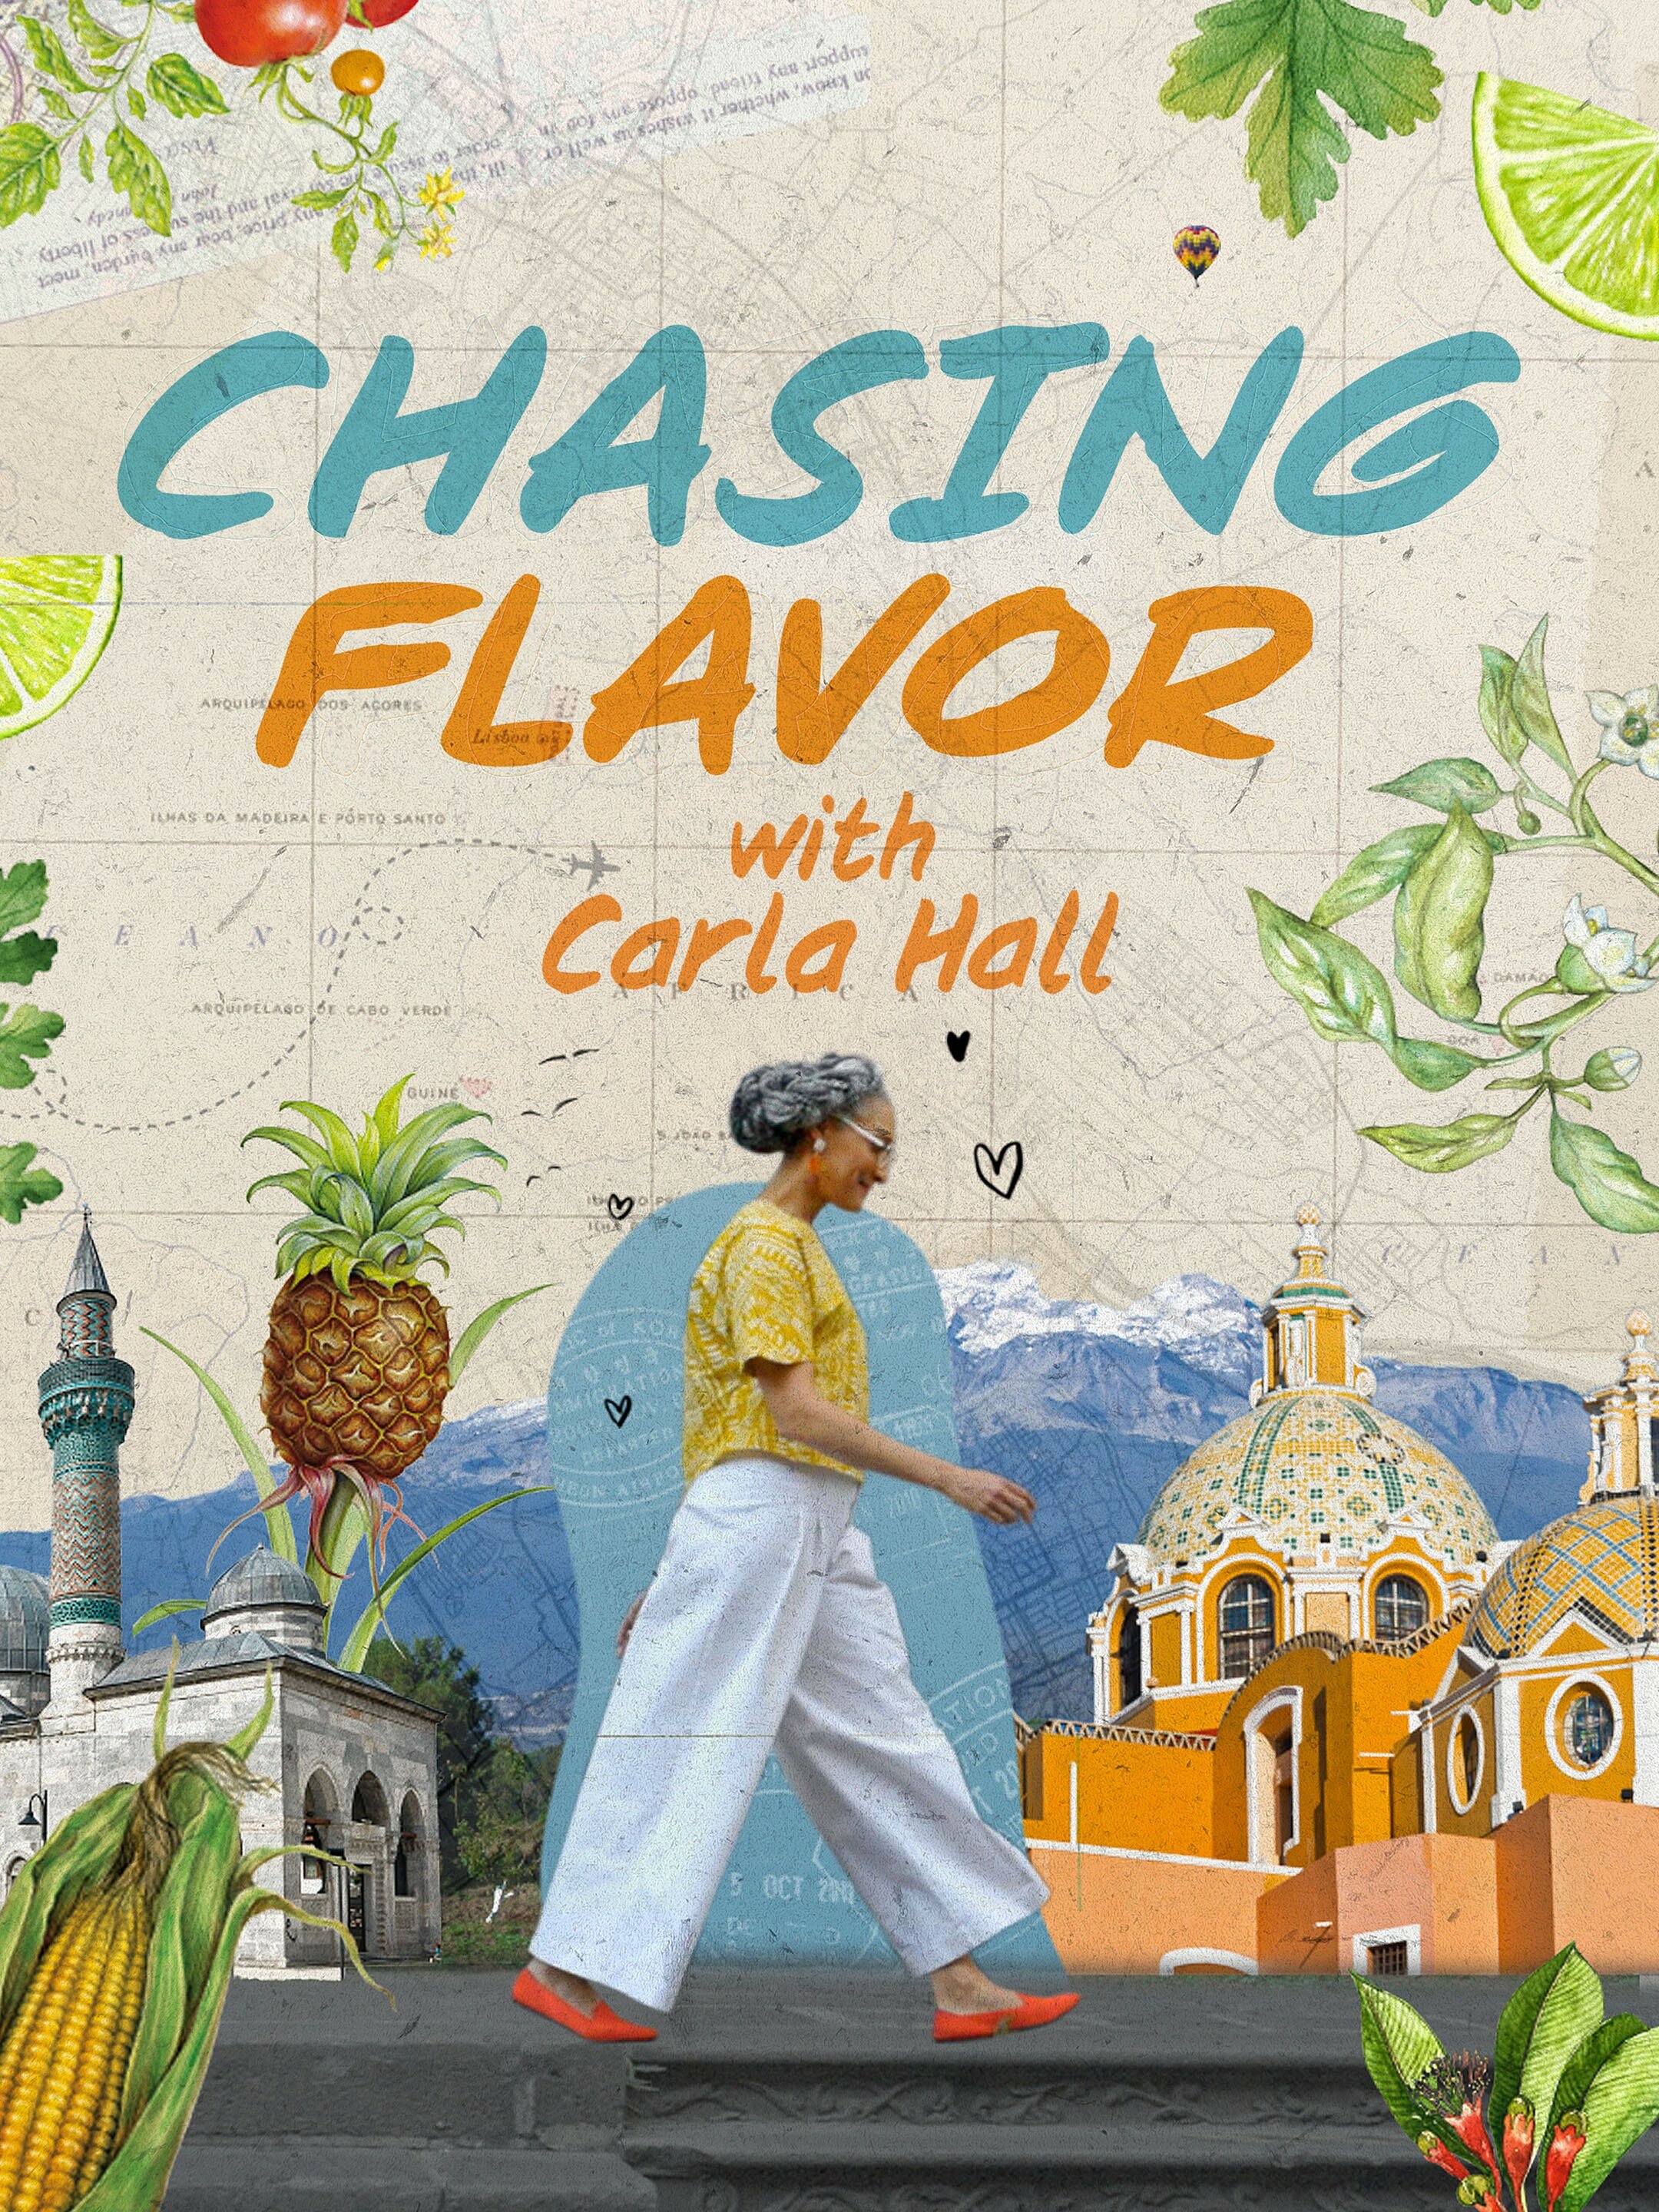 Chasing Flavor